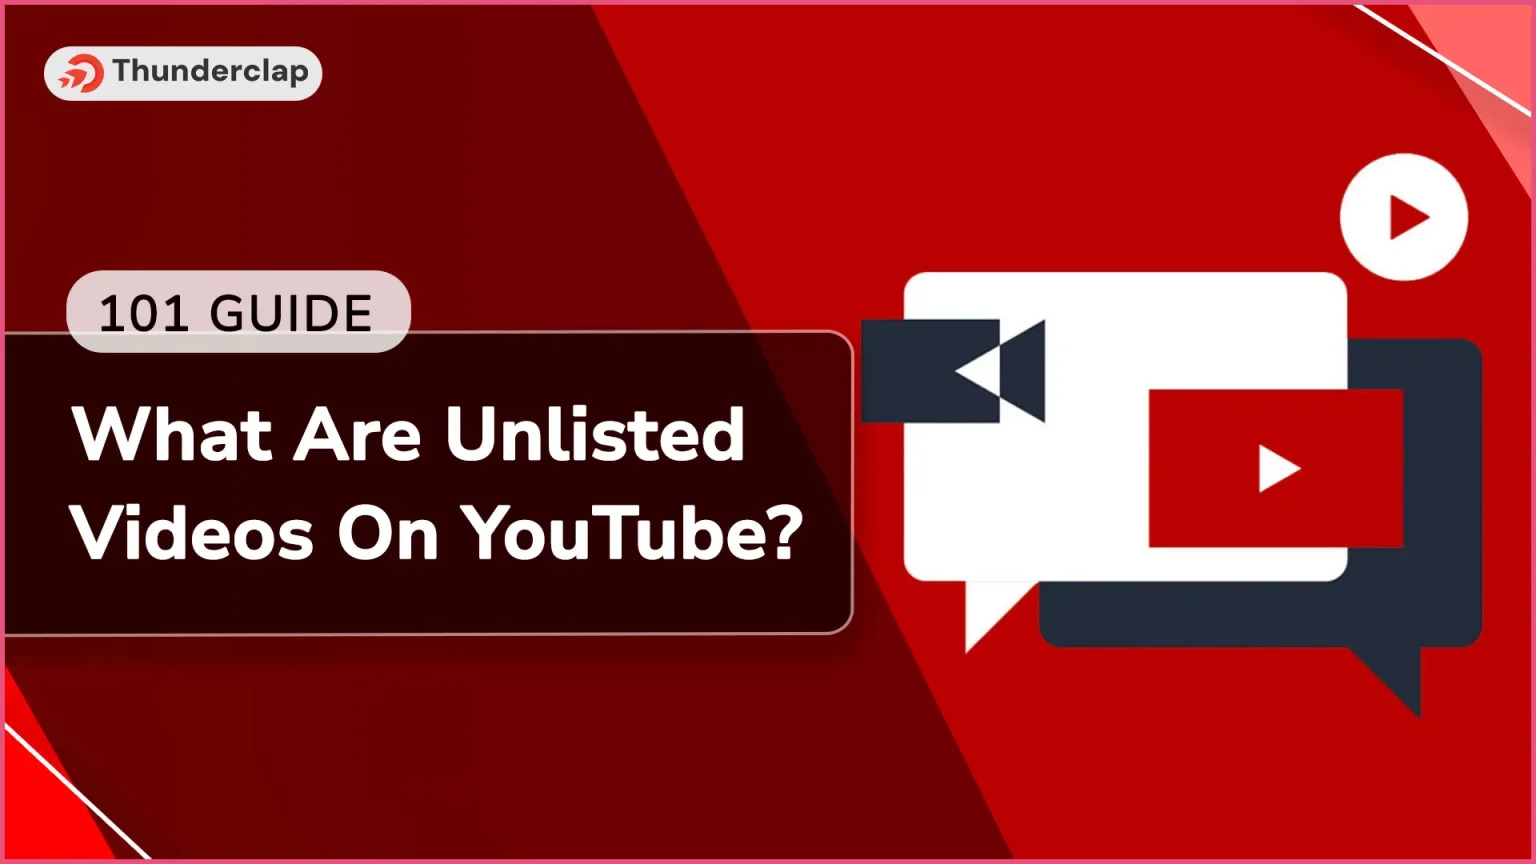 What Are Unlisted Videos On YouTube